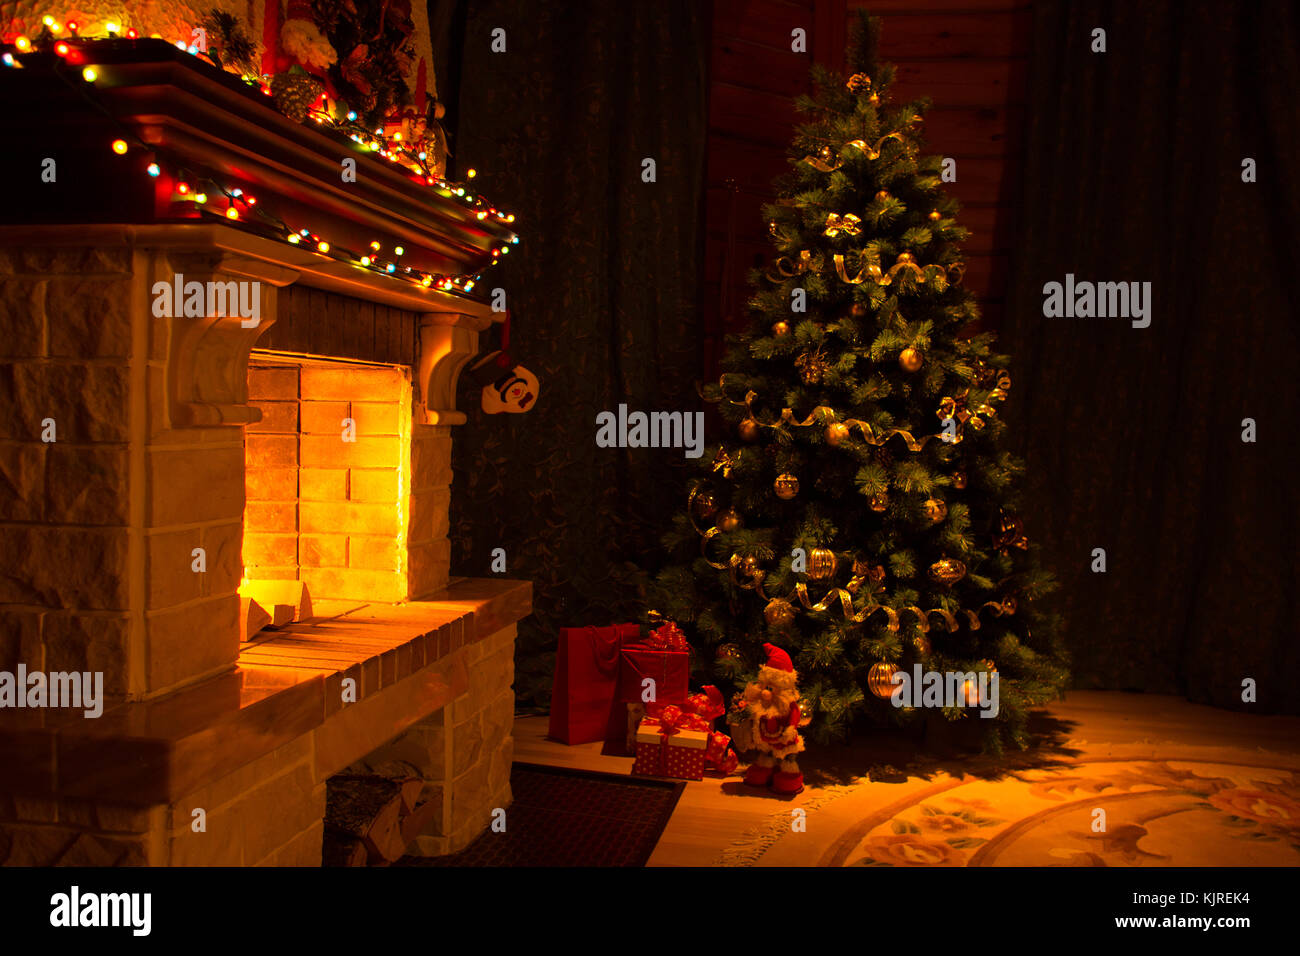 Beautiful house decorated for Christmas interior with fireplace Stock Photo